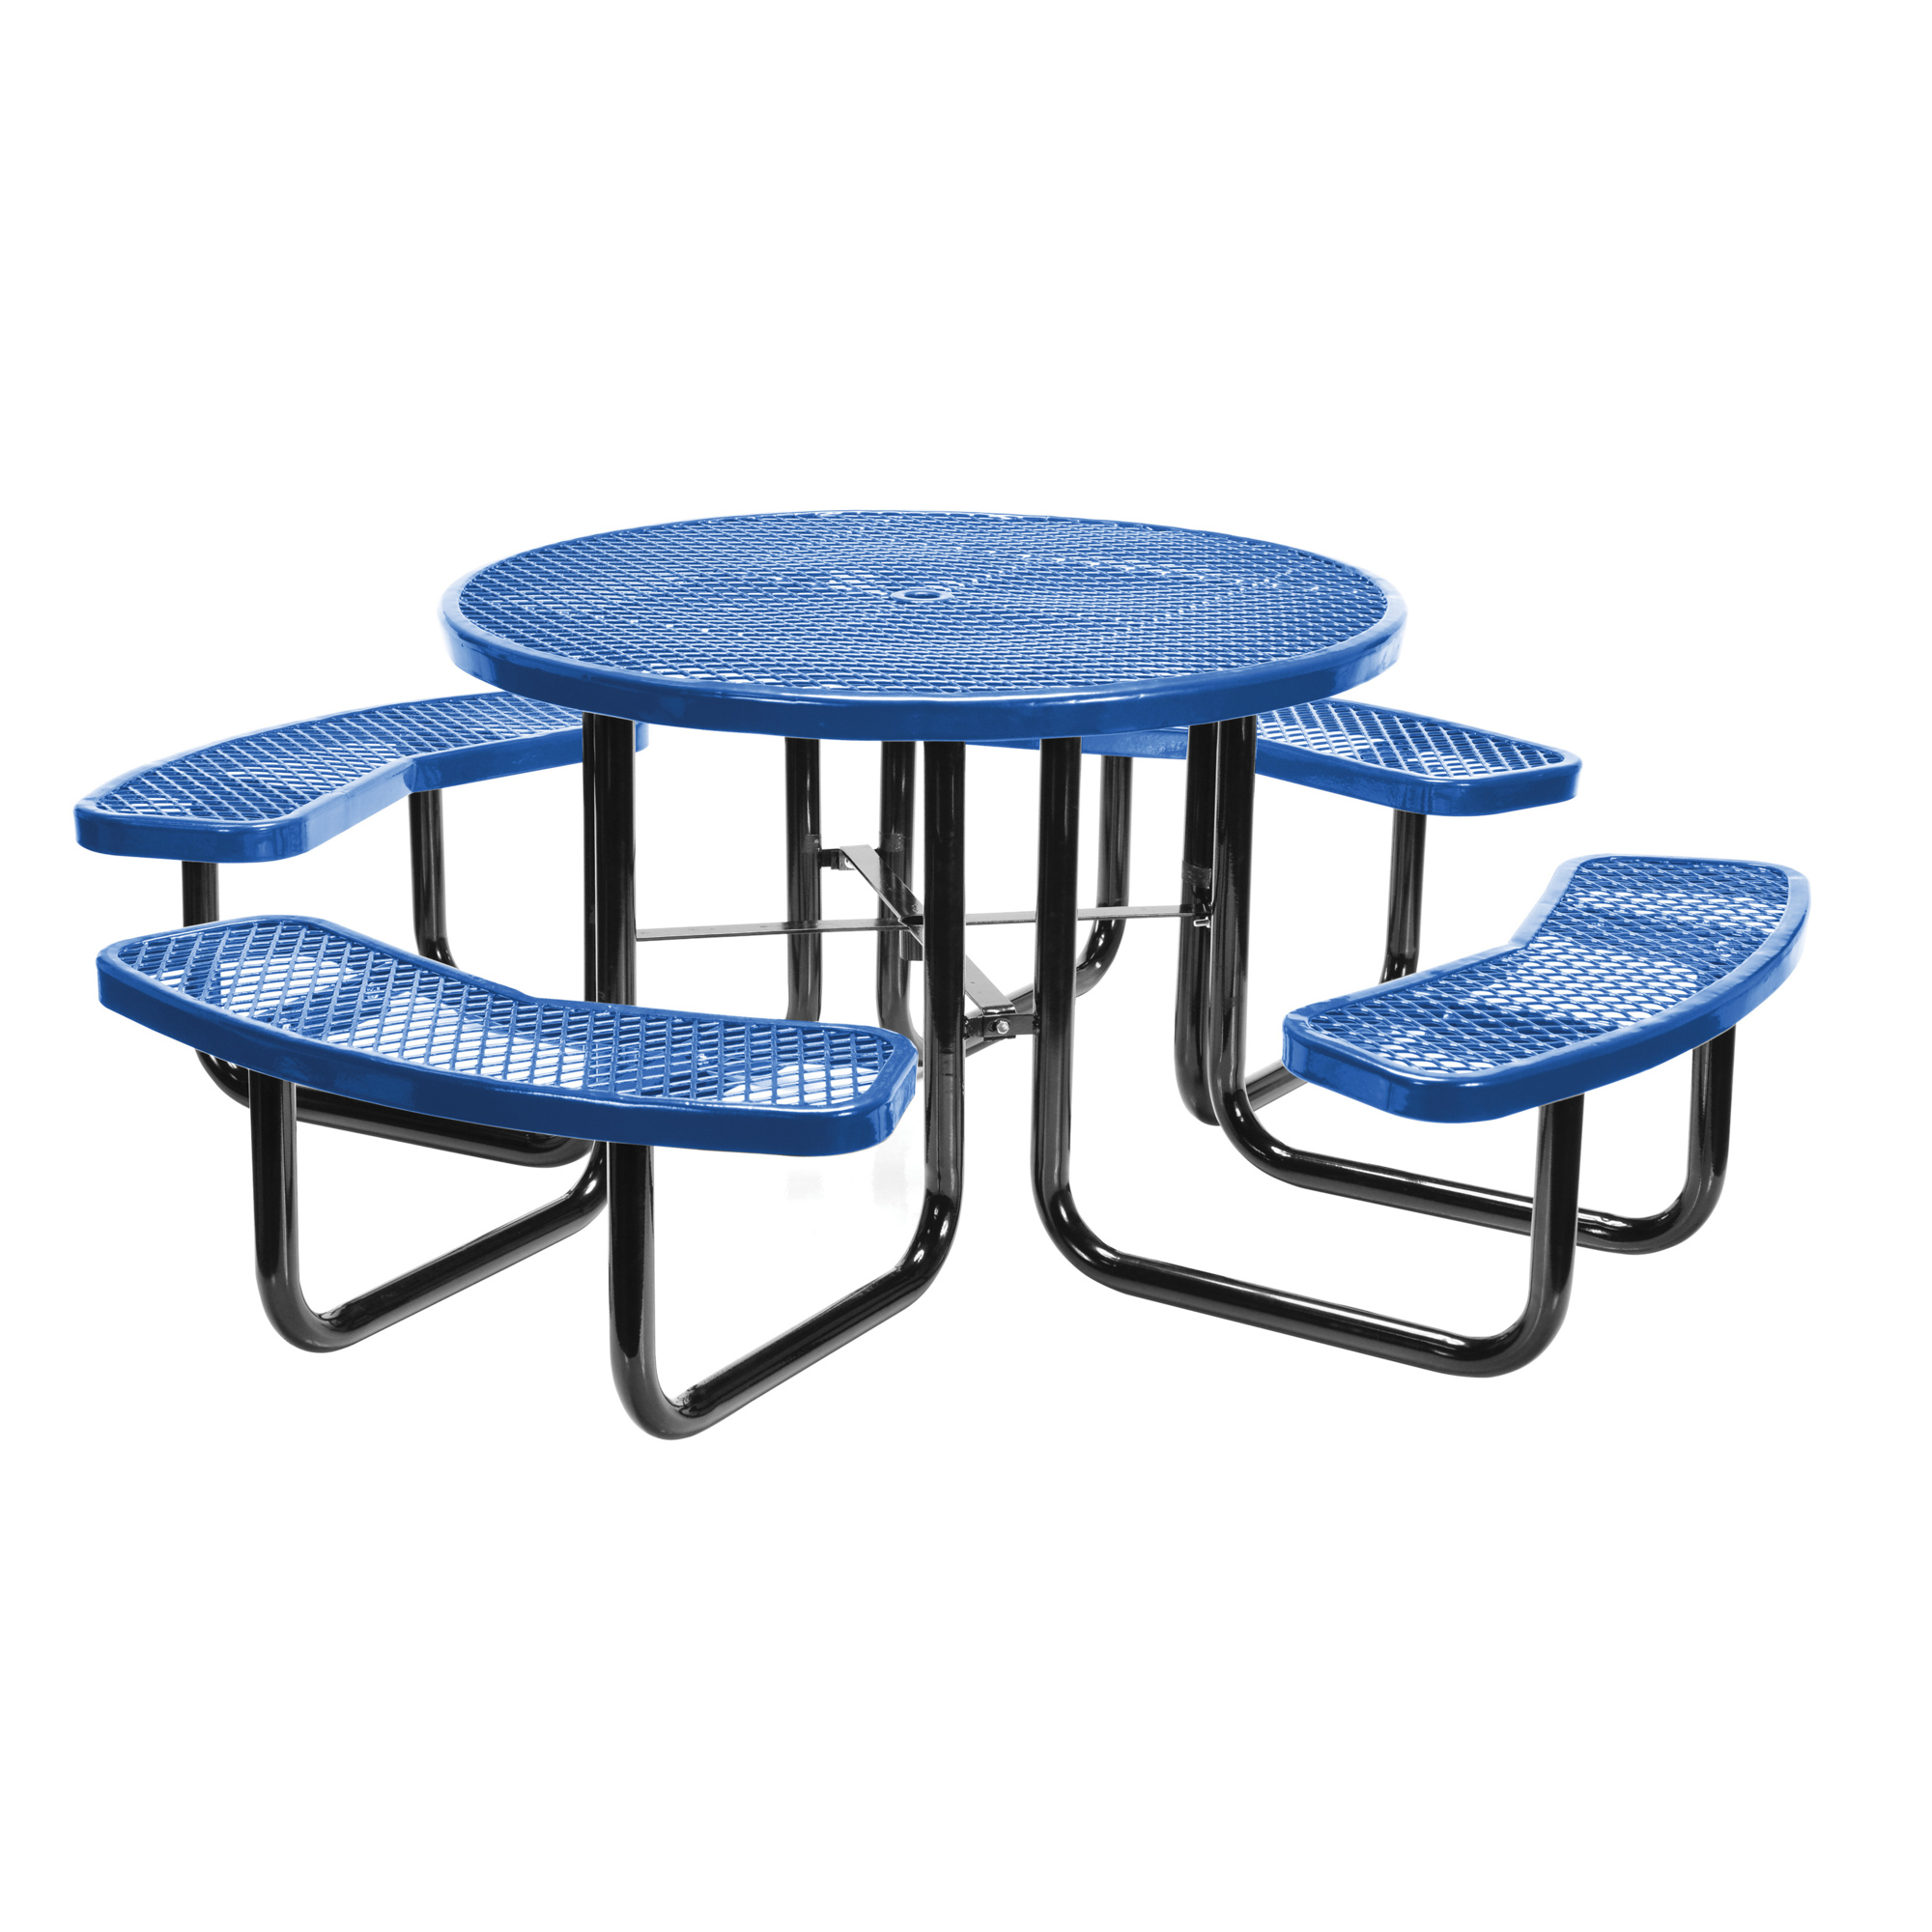 Vestil, Round Picnic Table 46Inch Blue, Table Shape Round, Primary Color Blue, Height 29 in, Model PT-MX-RT-46-BL